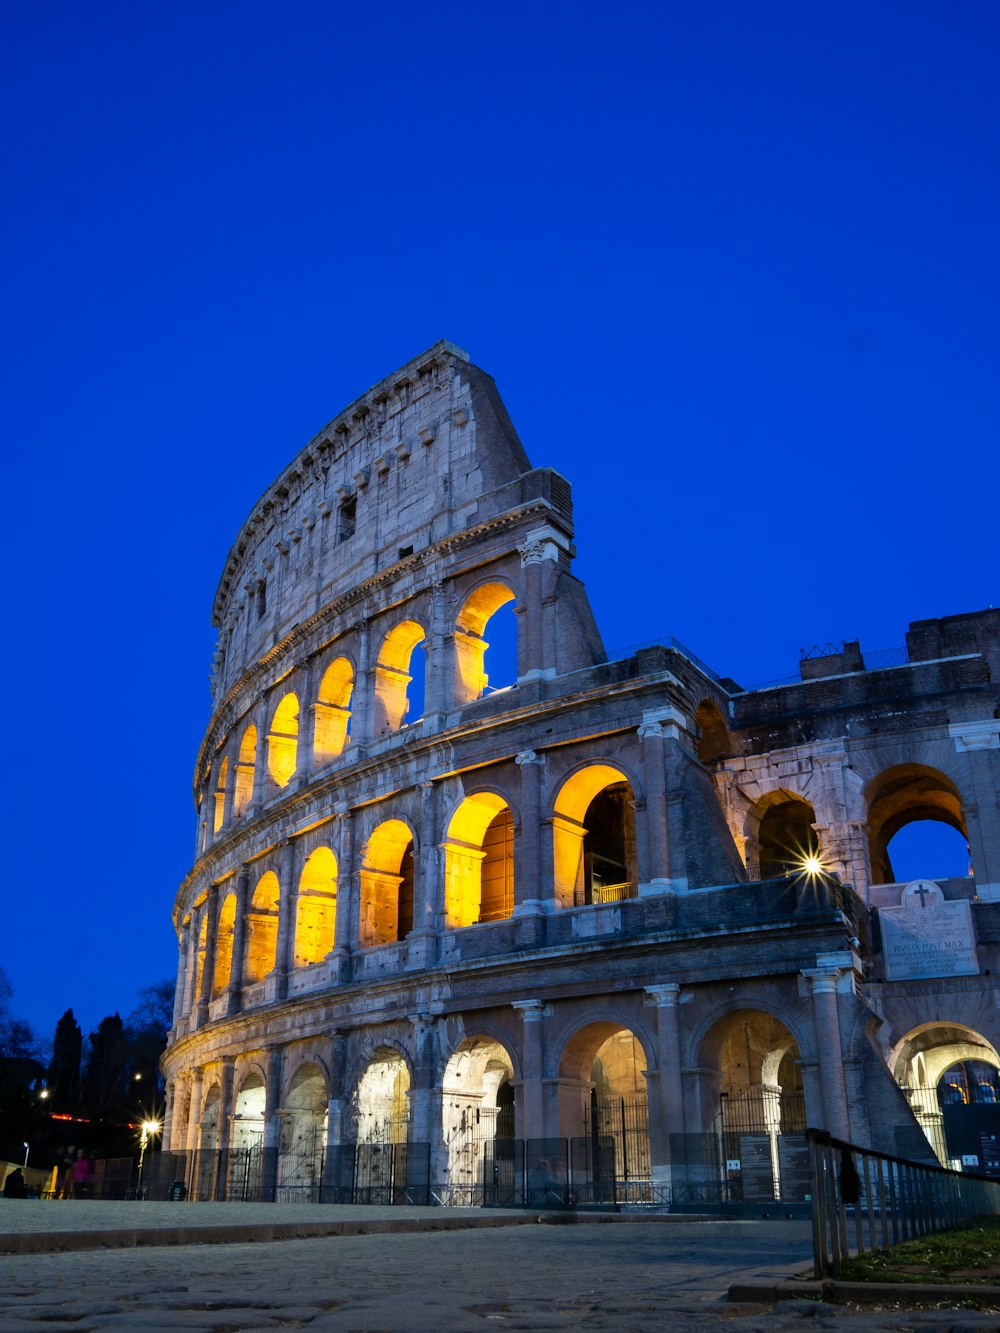 The colossion is lit up at night photo – Free Colosseum Image on Unsplash